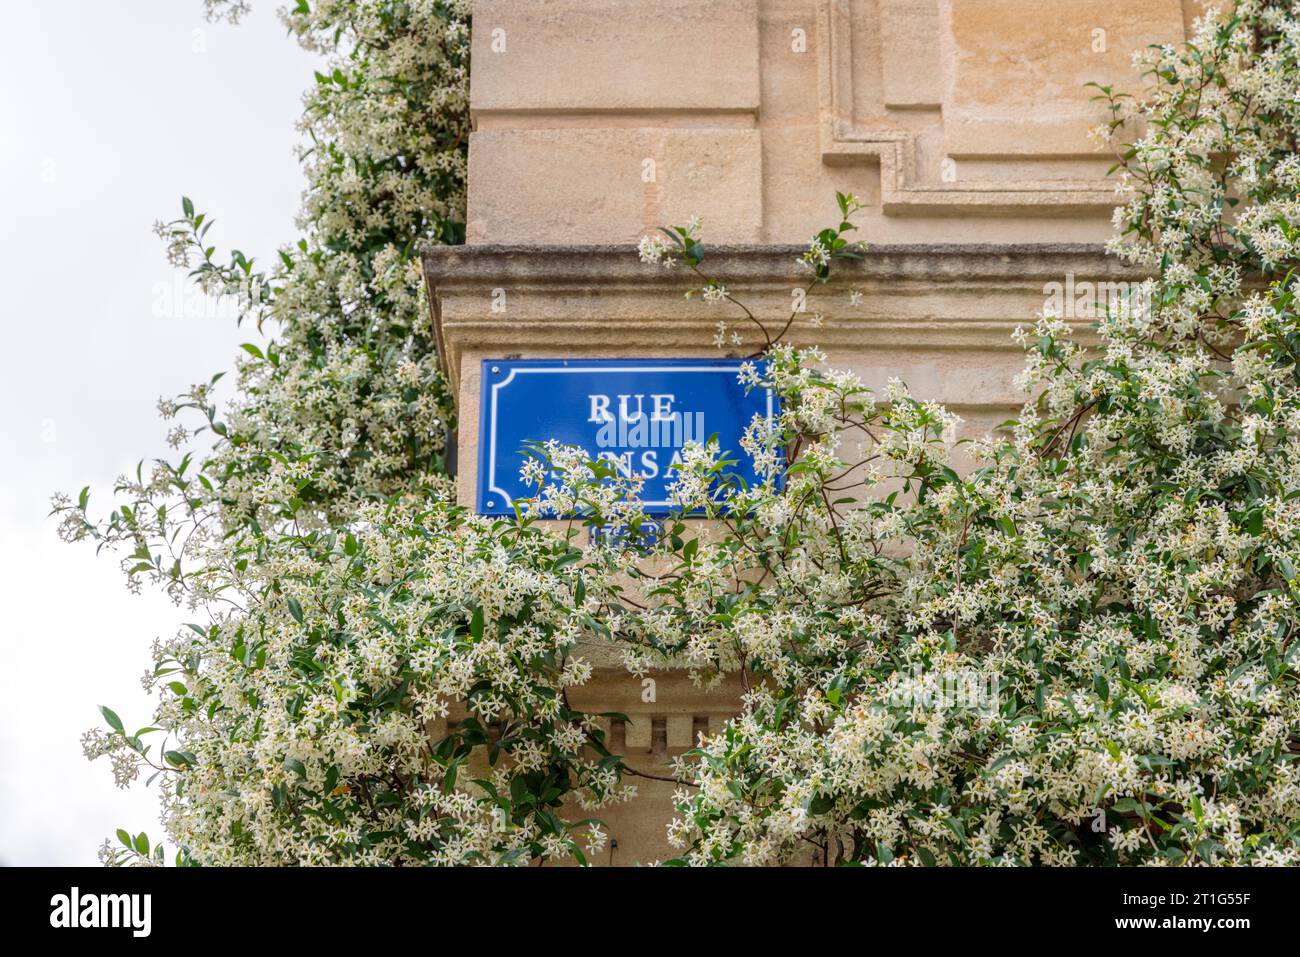 A climbing jasmine plant in bloom covers the corner of a stone building in Bordeaux, France.The jasmine flowers cover the blue street sign. Stock Photo